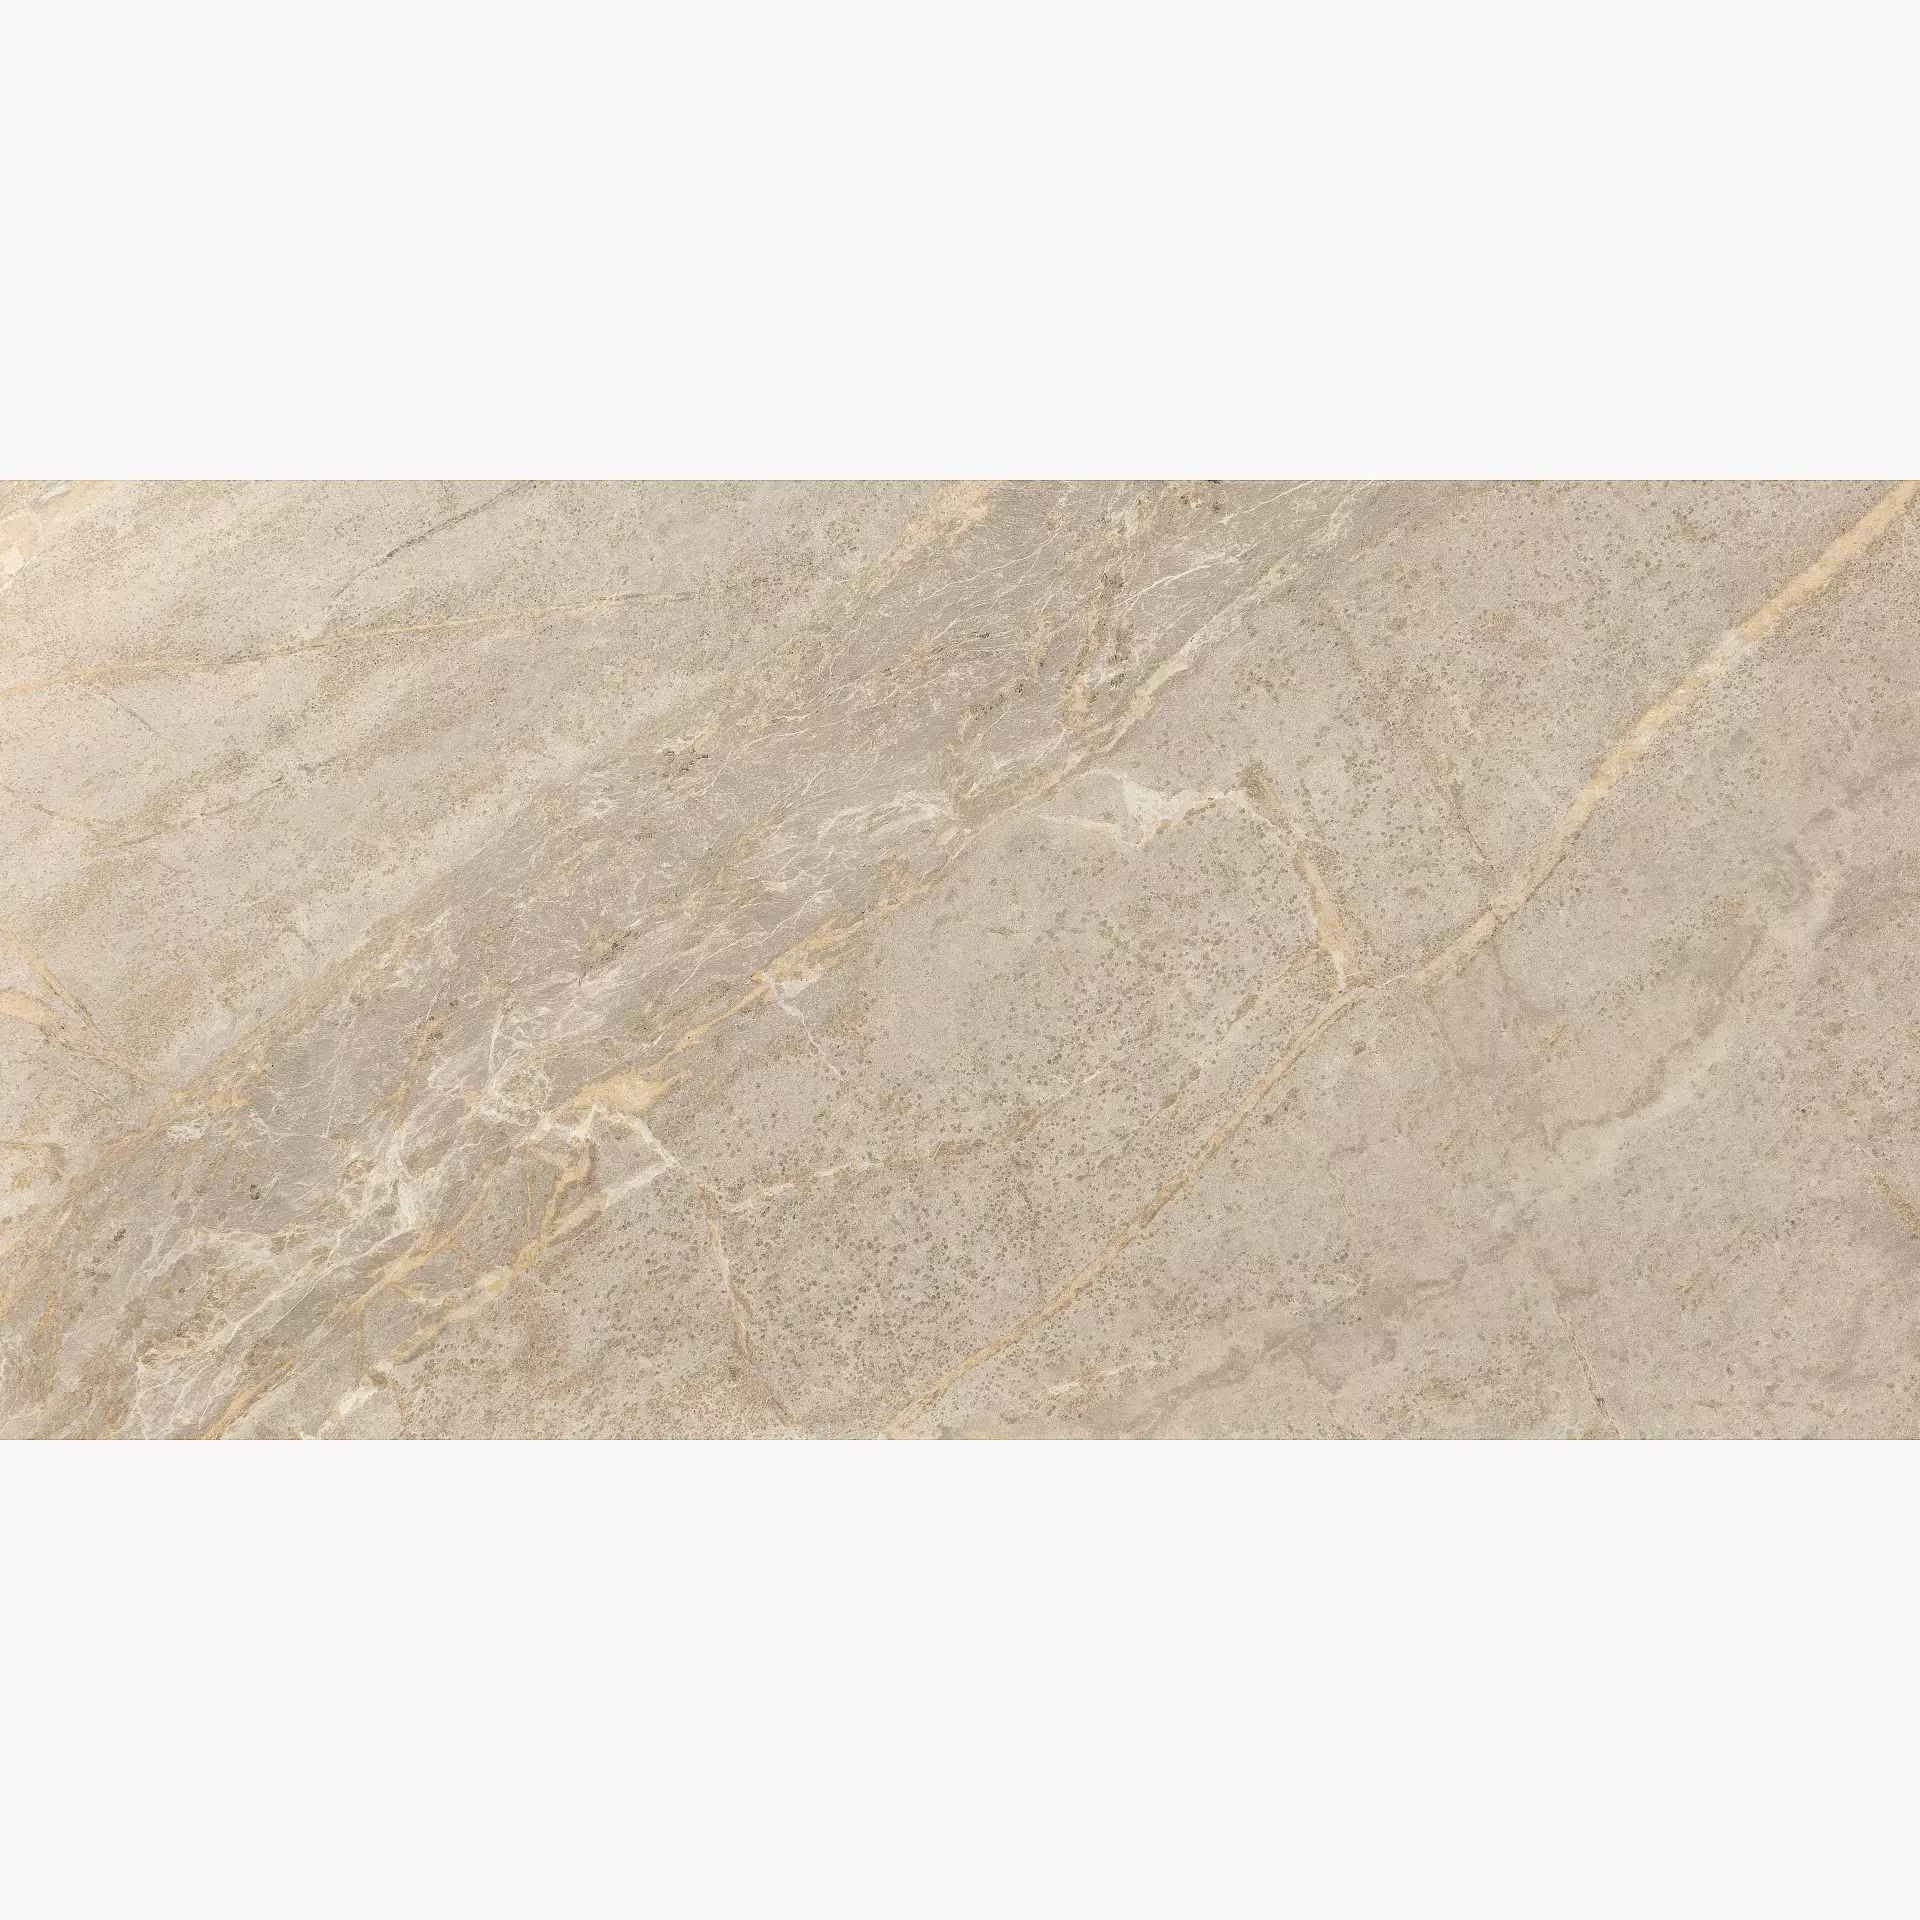 Coem Soap Stone Greige Naturale 0SO362R 30x60cm rectified 9mm